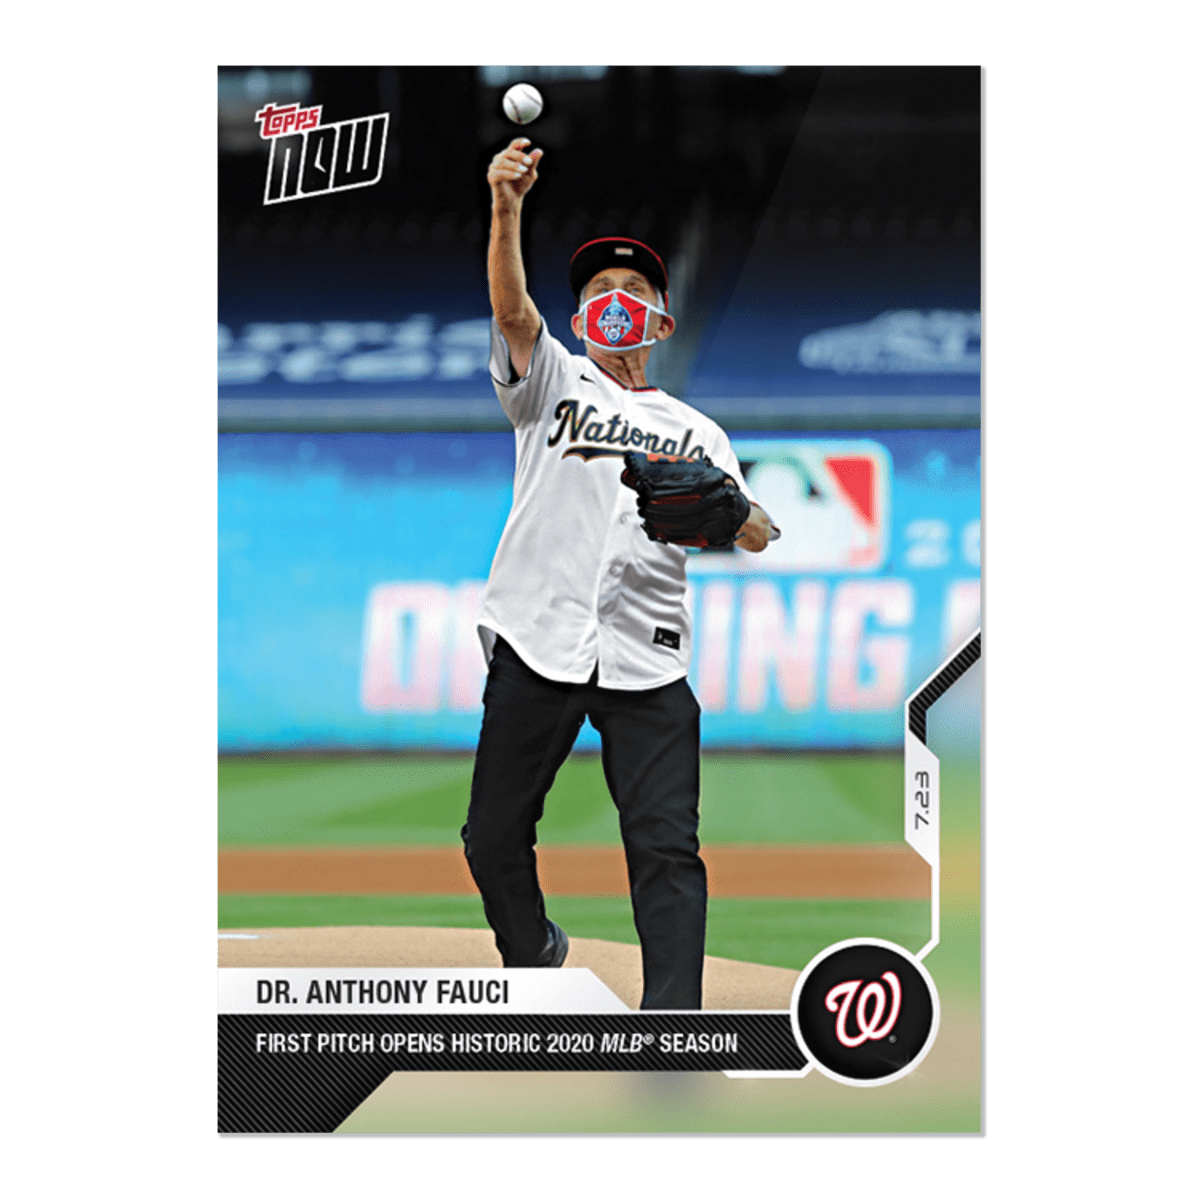 Dr. Anthony Fauci baseball card becomes best-selling card in Topps